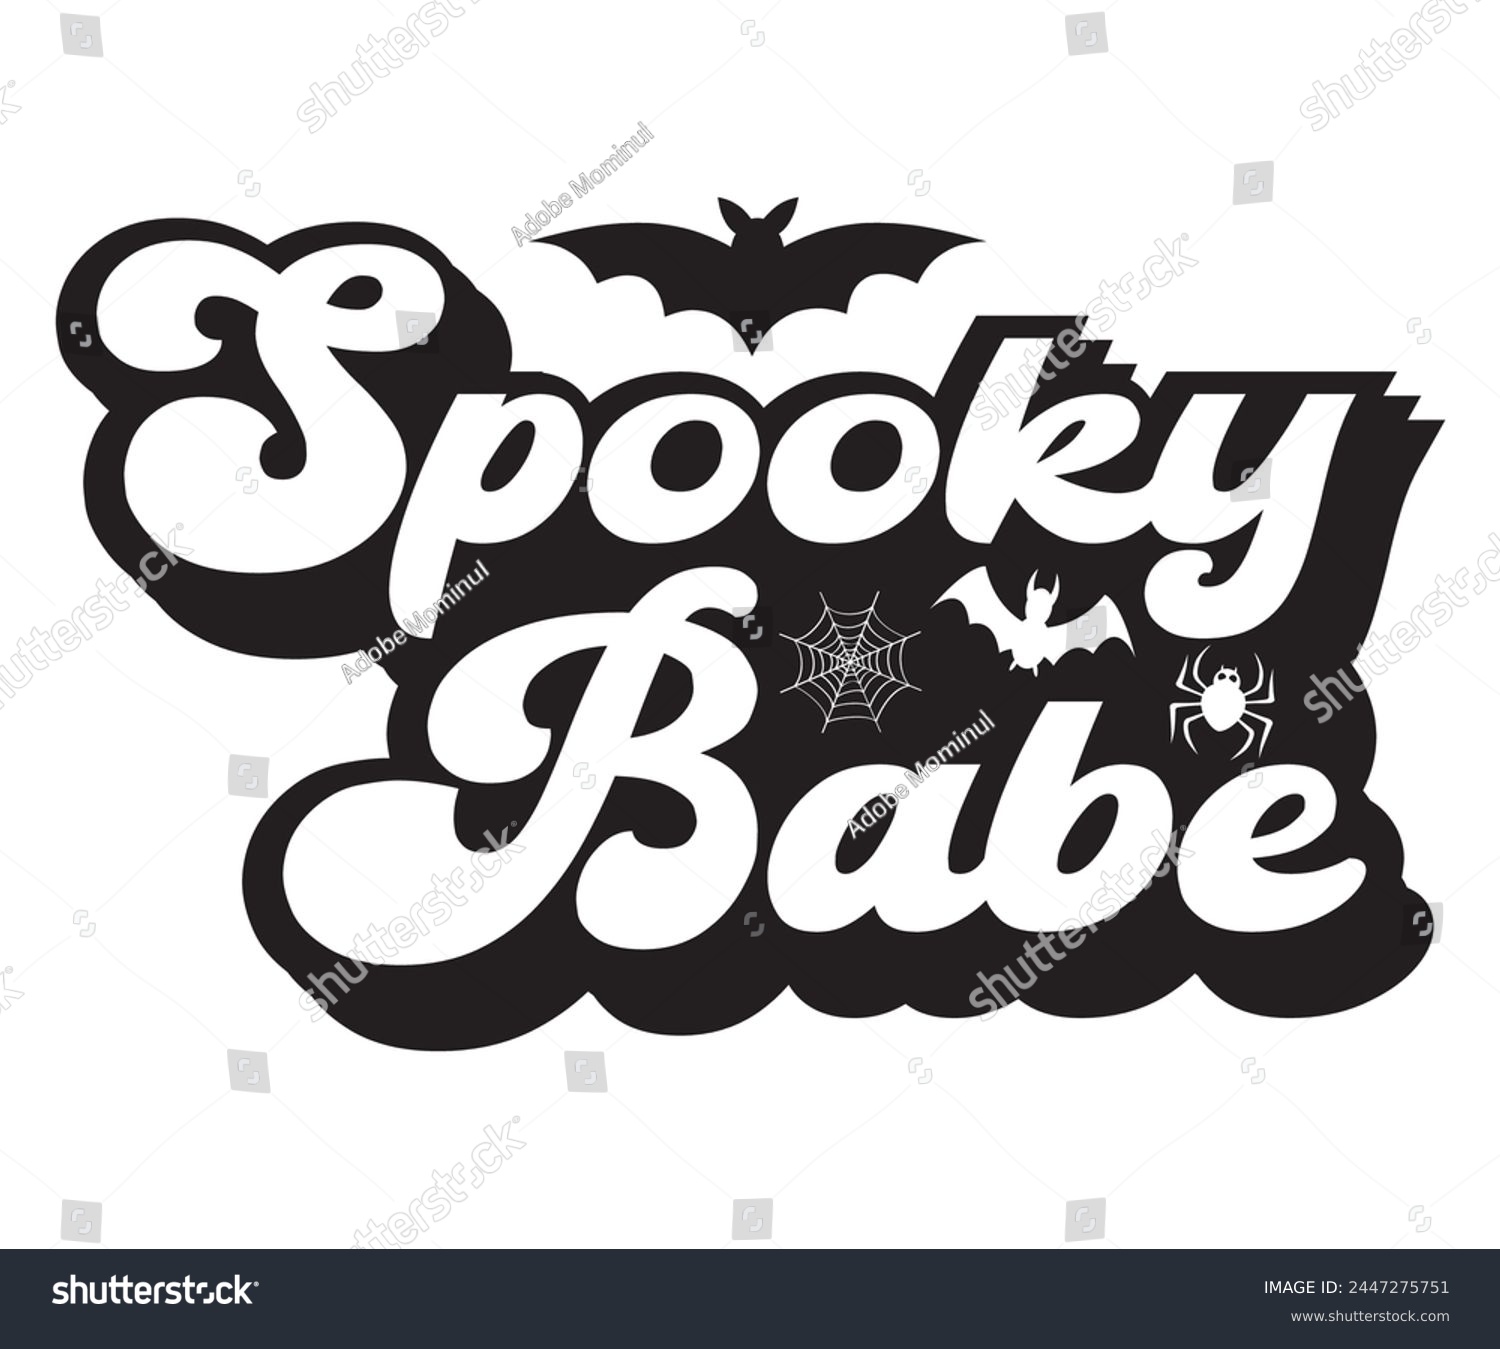 SVG of Spooky Babe,Halloween Svg,Typography,Halloween Quotes,Witches Svg,Halloween Party,Halloween Costume,Halloween Gift,Funny Halloween,Spooky Svg,Funny T shirt,Ghost Svg,Cut file svg